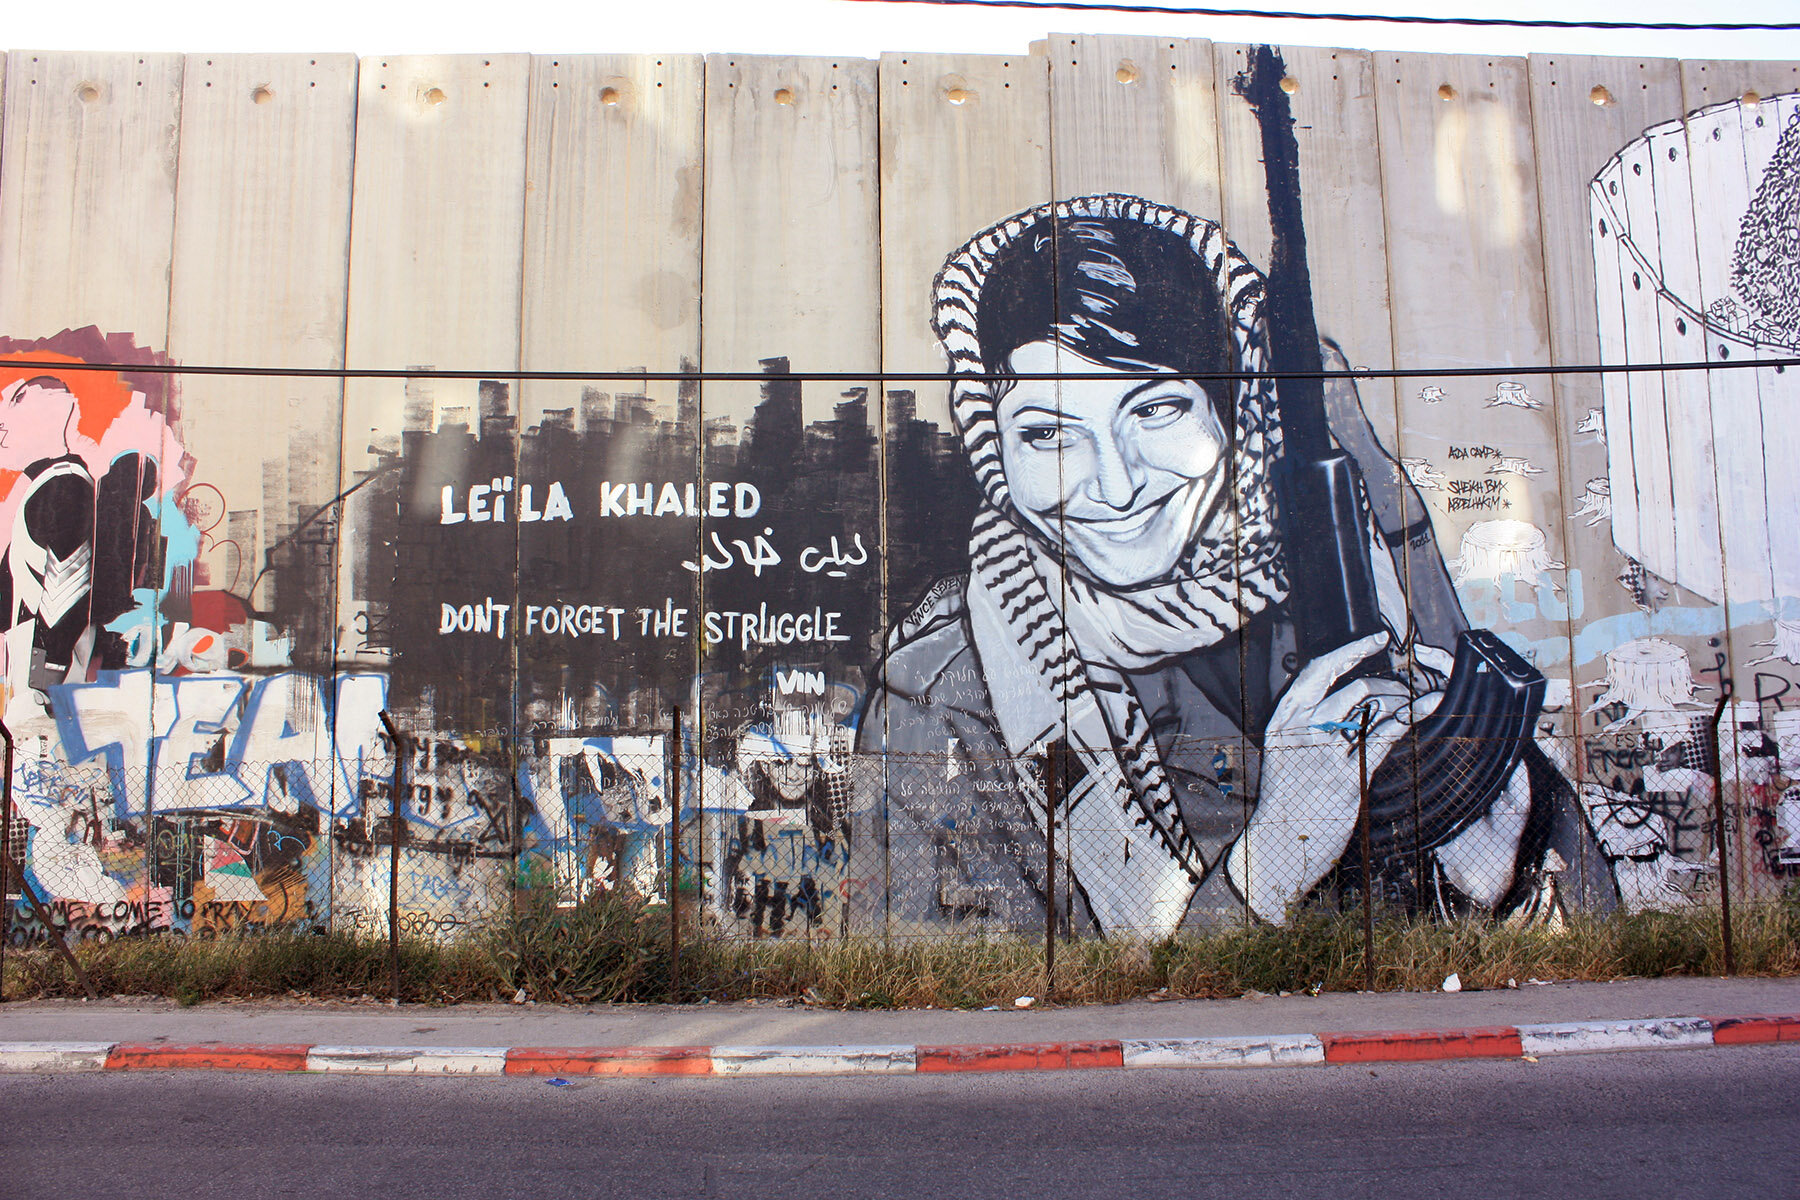 A mural of  Leila Khaled , the first woman member of the Popular Front for the Liberation of Palestine. The photograph of her in a kaffiyeh holding an AK-47 rifle, taken by Eddie Adams, became a symbol of the Palestinian resistance in the 1970s. She was also the first woman to hijack a plane in the late 1960s, and has consequently gone down in history as both a hero and a terrorist. Her mural on the wall, near Bethlehem in the West Bank, is a staunch reminder of both the resistance's past and its contested presence.